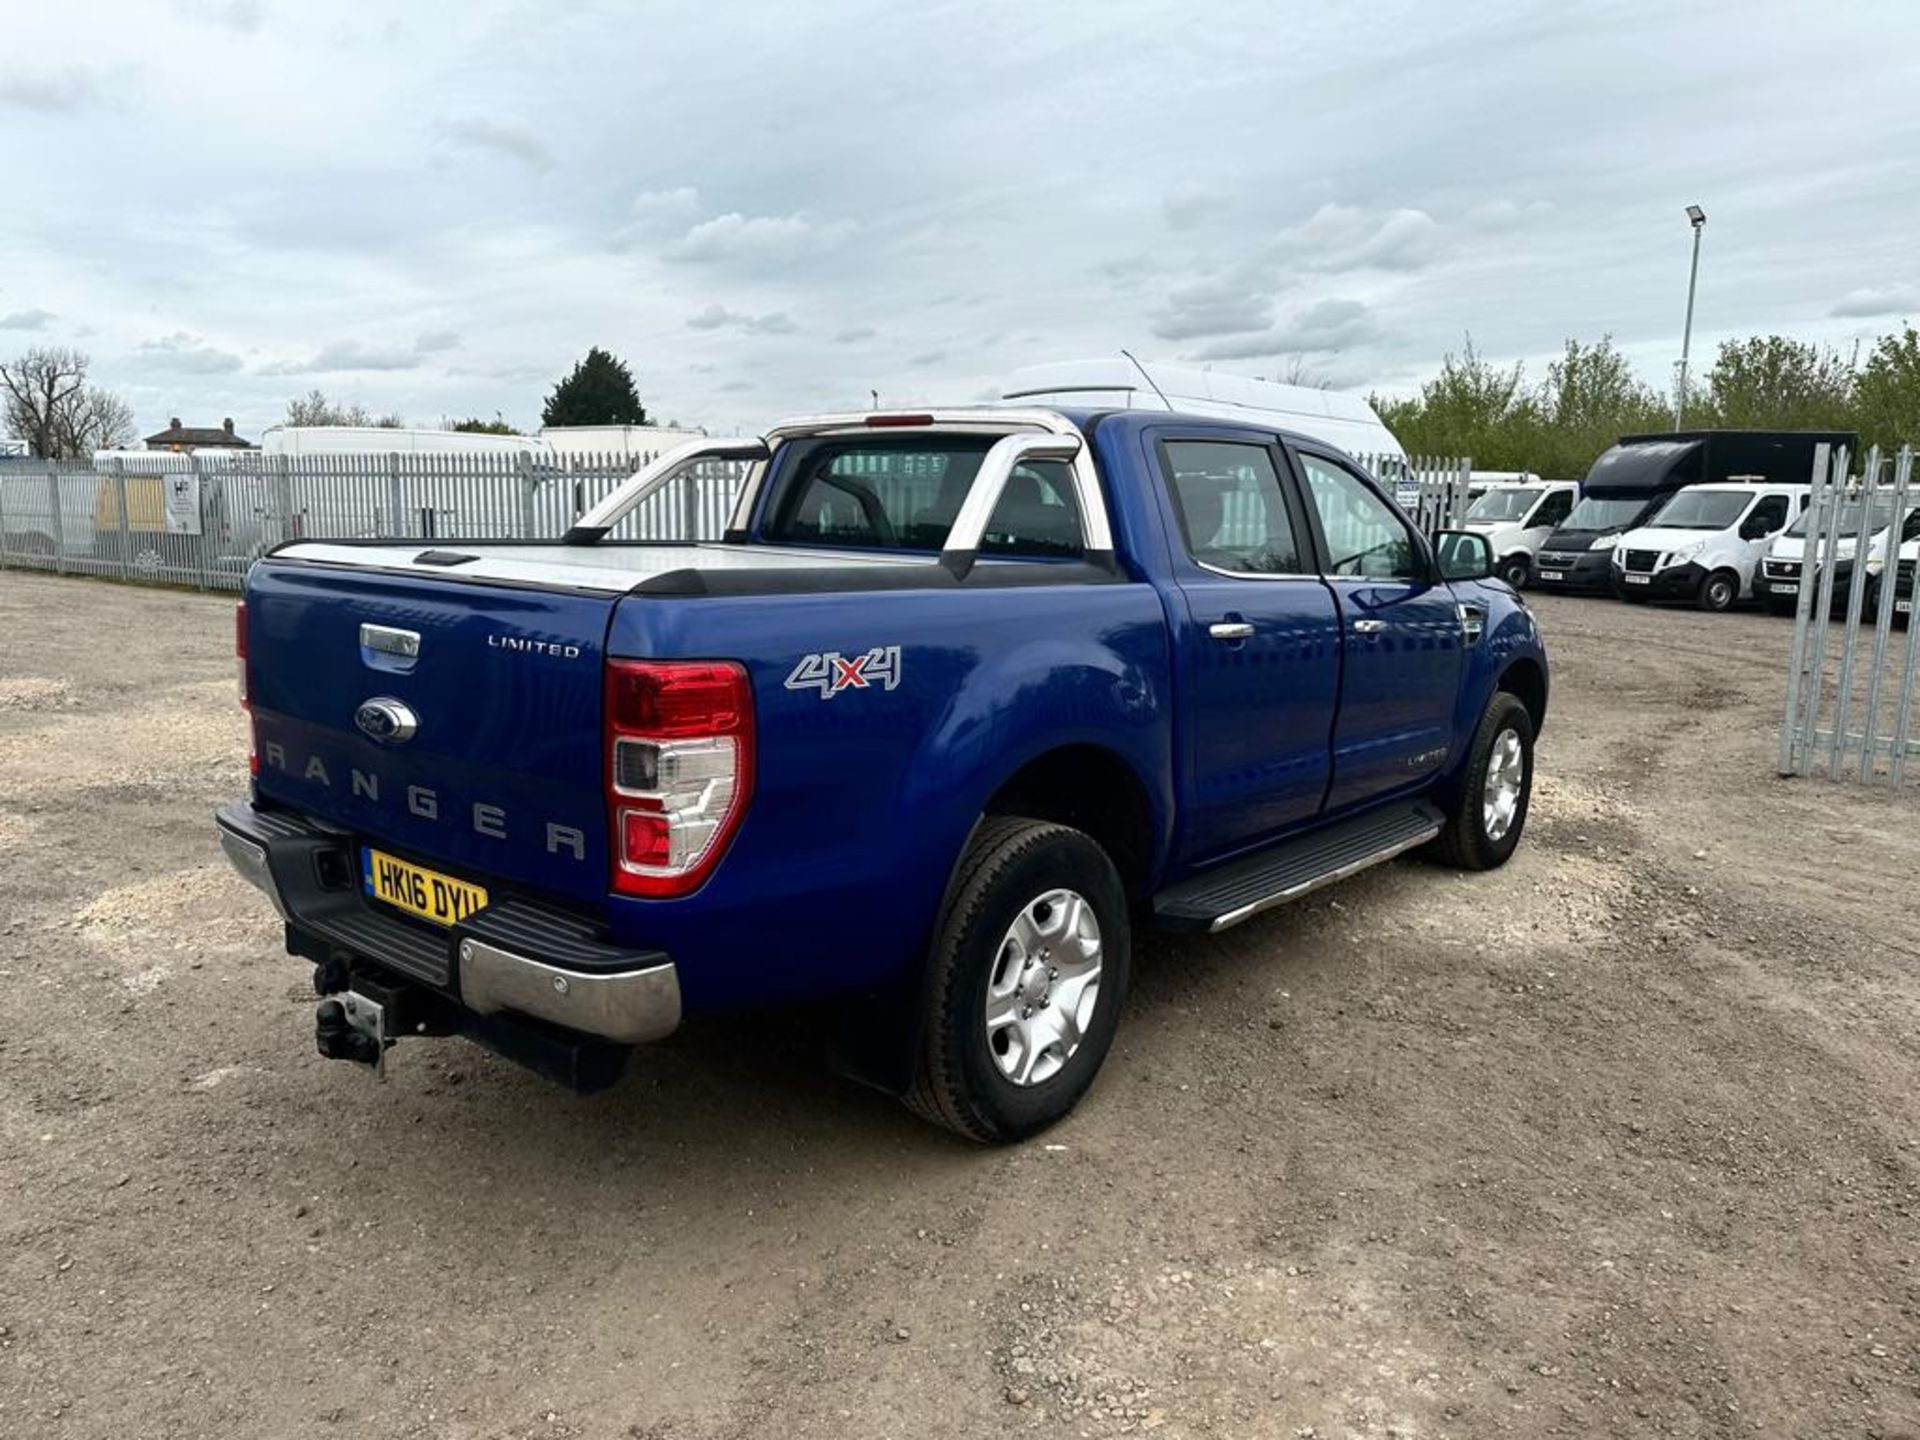 ** ON SALE ** Ford Ranger Limited DCI TDCI 160 4X4 2016 '16 Reg'-Automatic - A/C - -Bluetooth-No Vat - Image 12 of 38